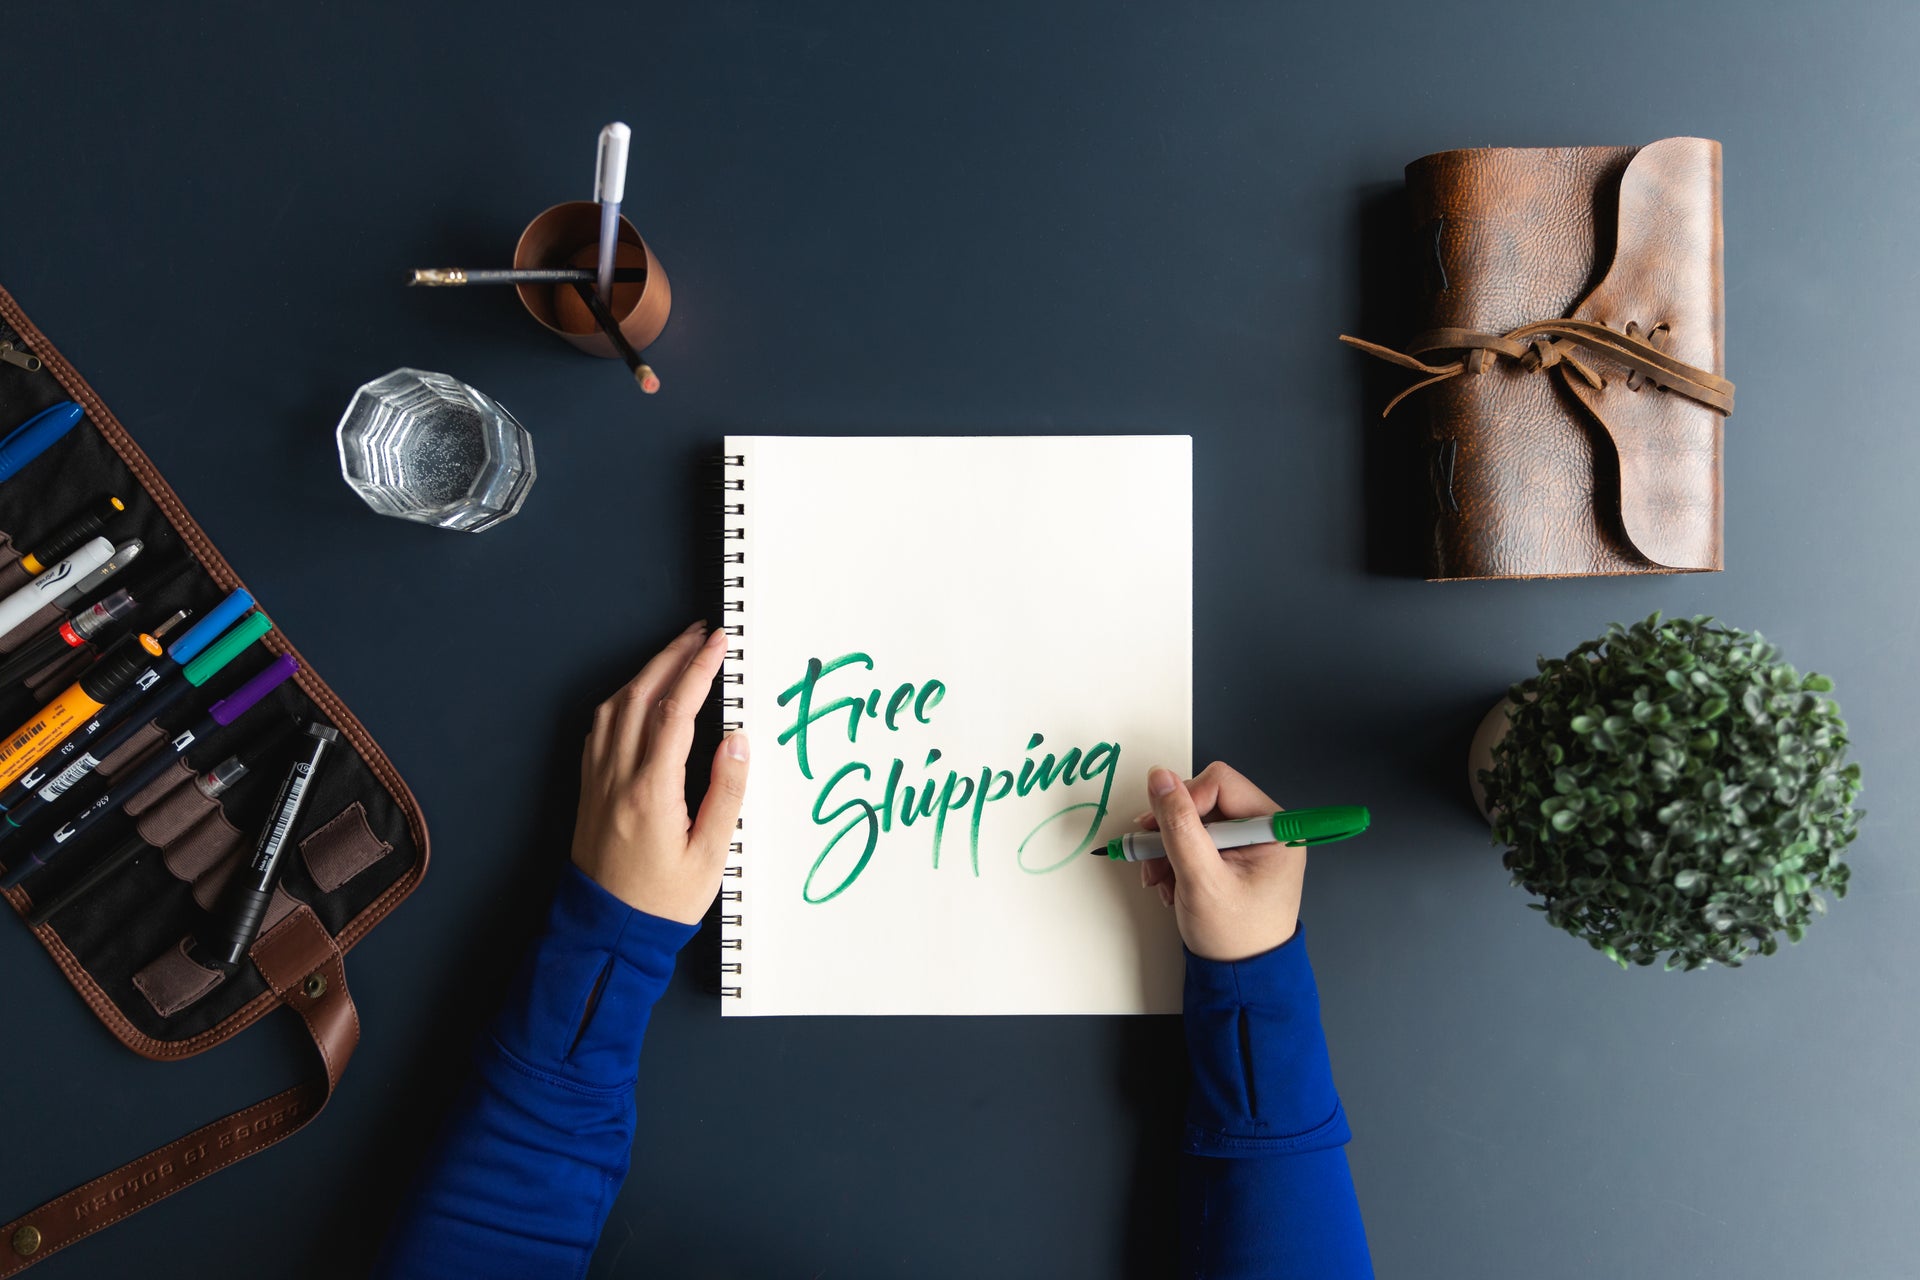 KKW Creative Top 10 Shopify Experts Vancouver Abbotsford - Shipping Strategy Expert Service